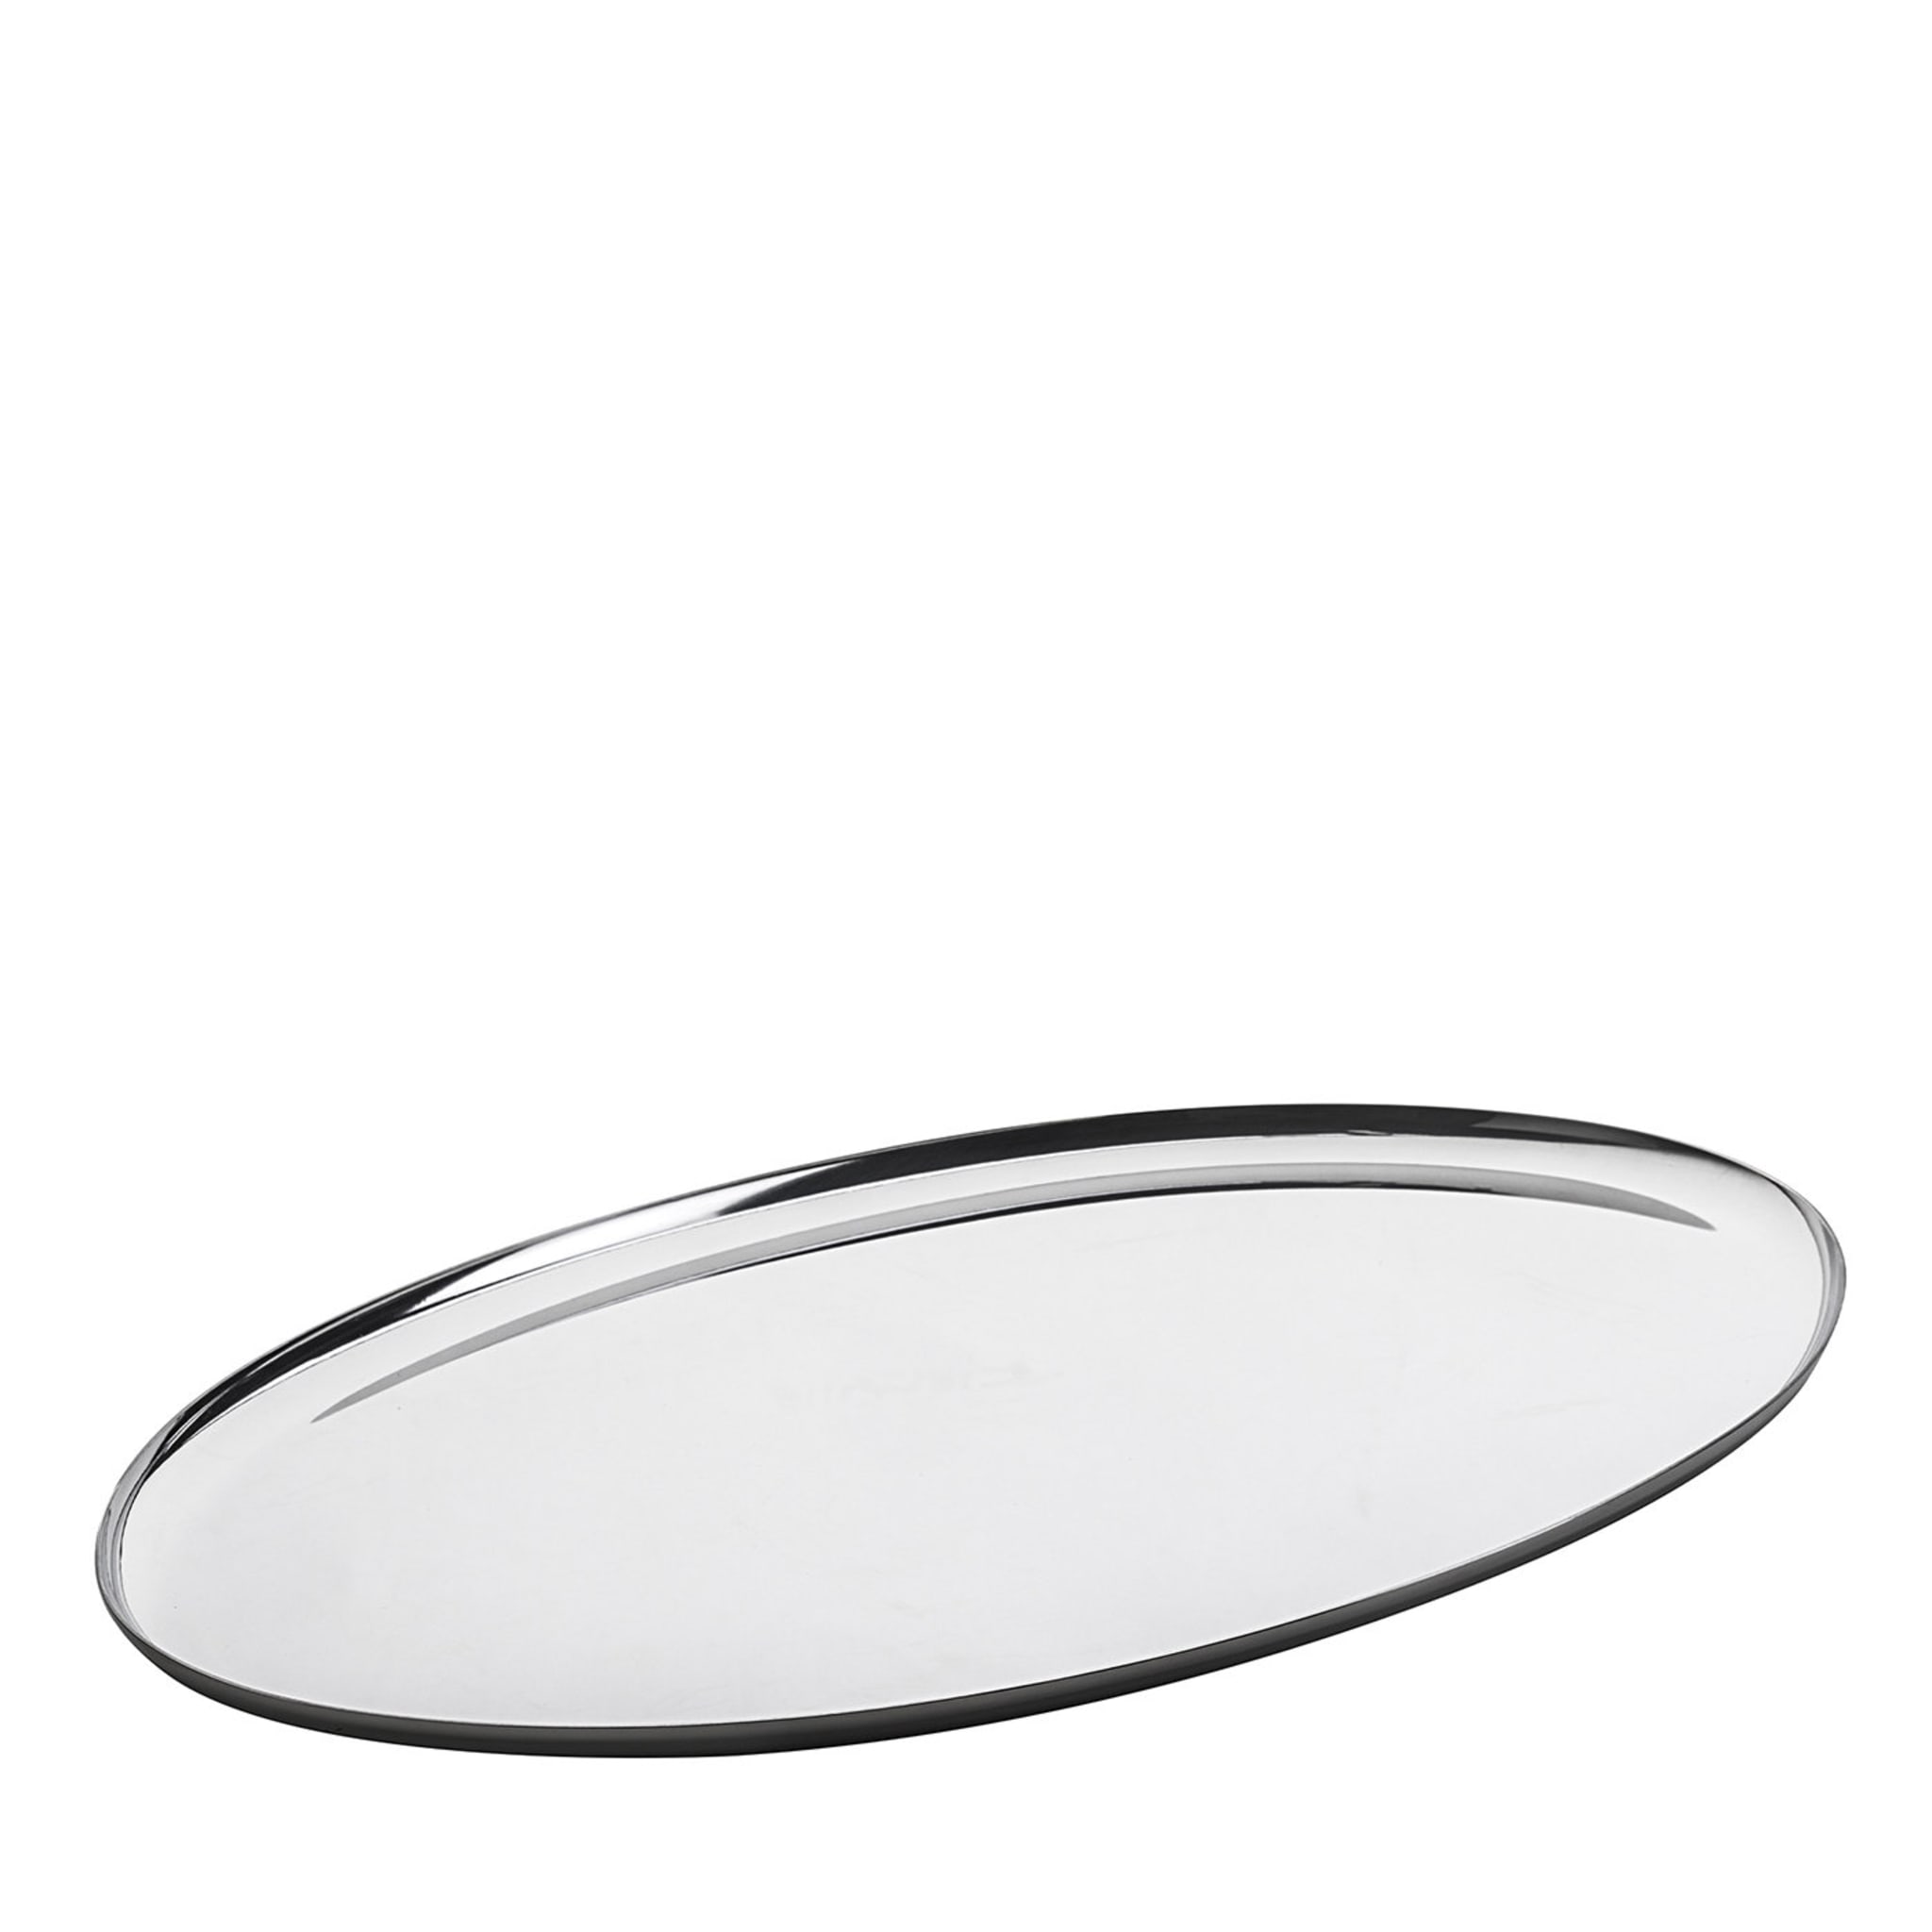 Stile Stainless Steel Oval Tray - Main view